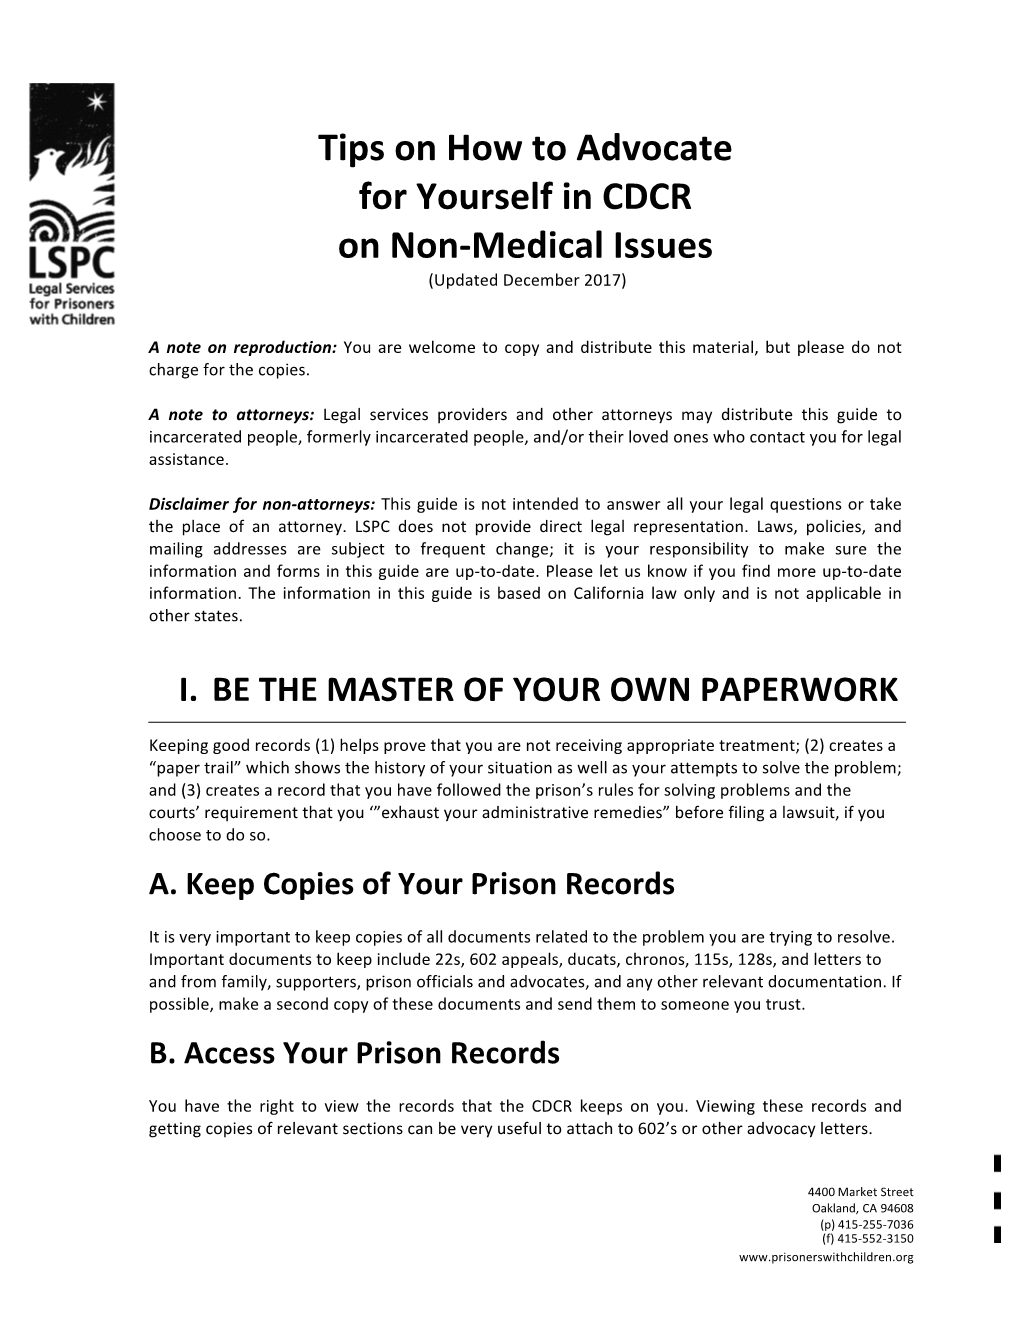 Tips on How to Advocate for Yourself in CDCR on Non-Medical Issues (Updated December 2017)